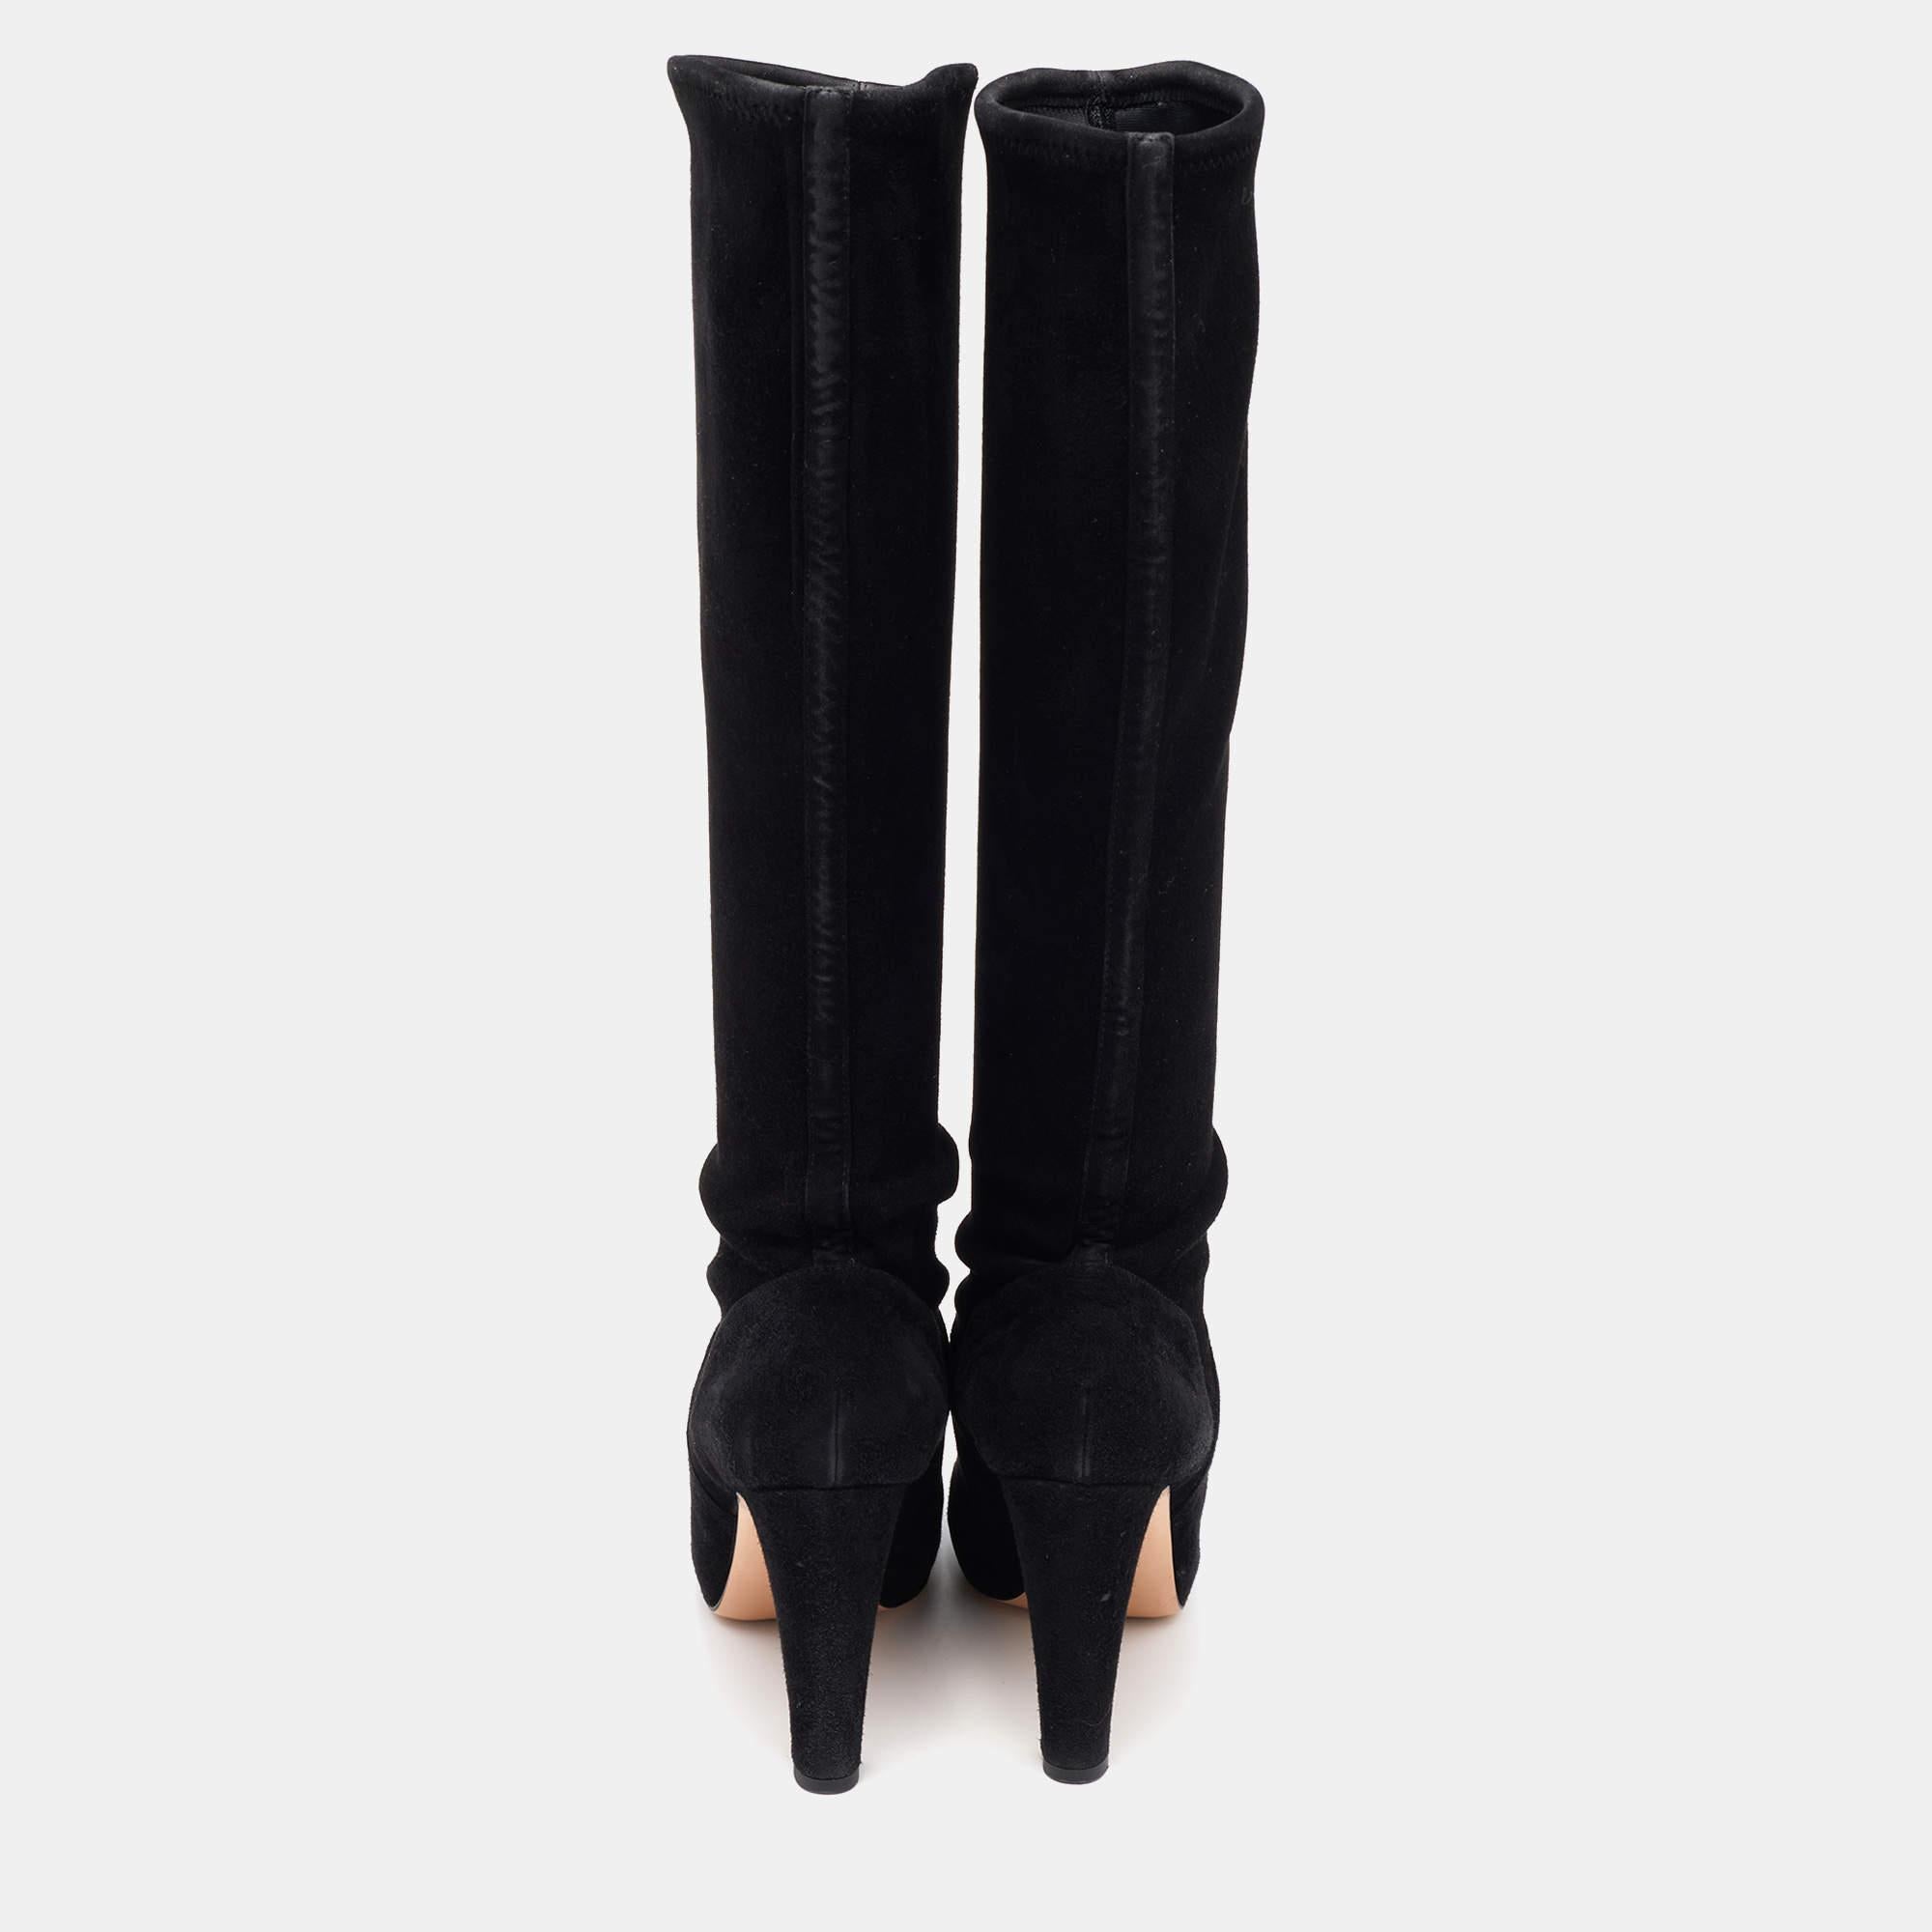 Gianvito Rossi Black Suede Knee Length Boots Size 37.5 For Sale 2